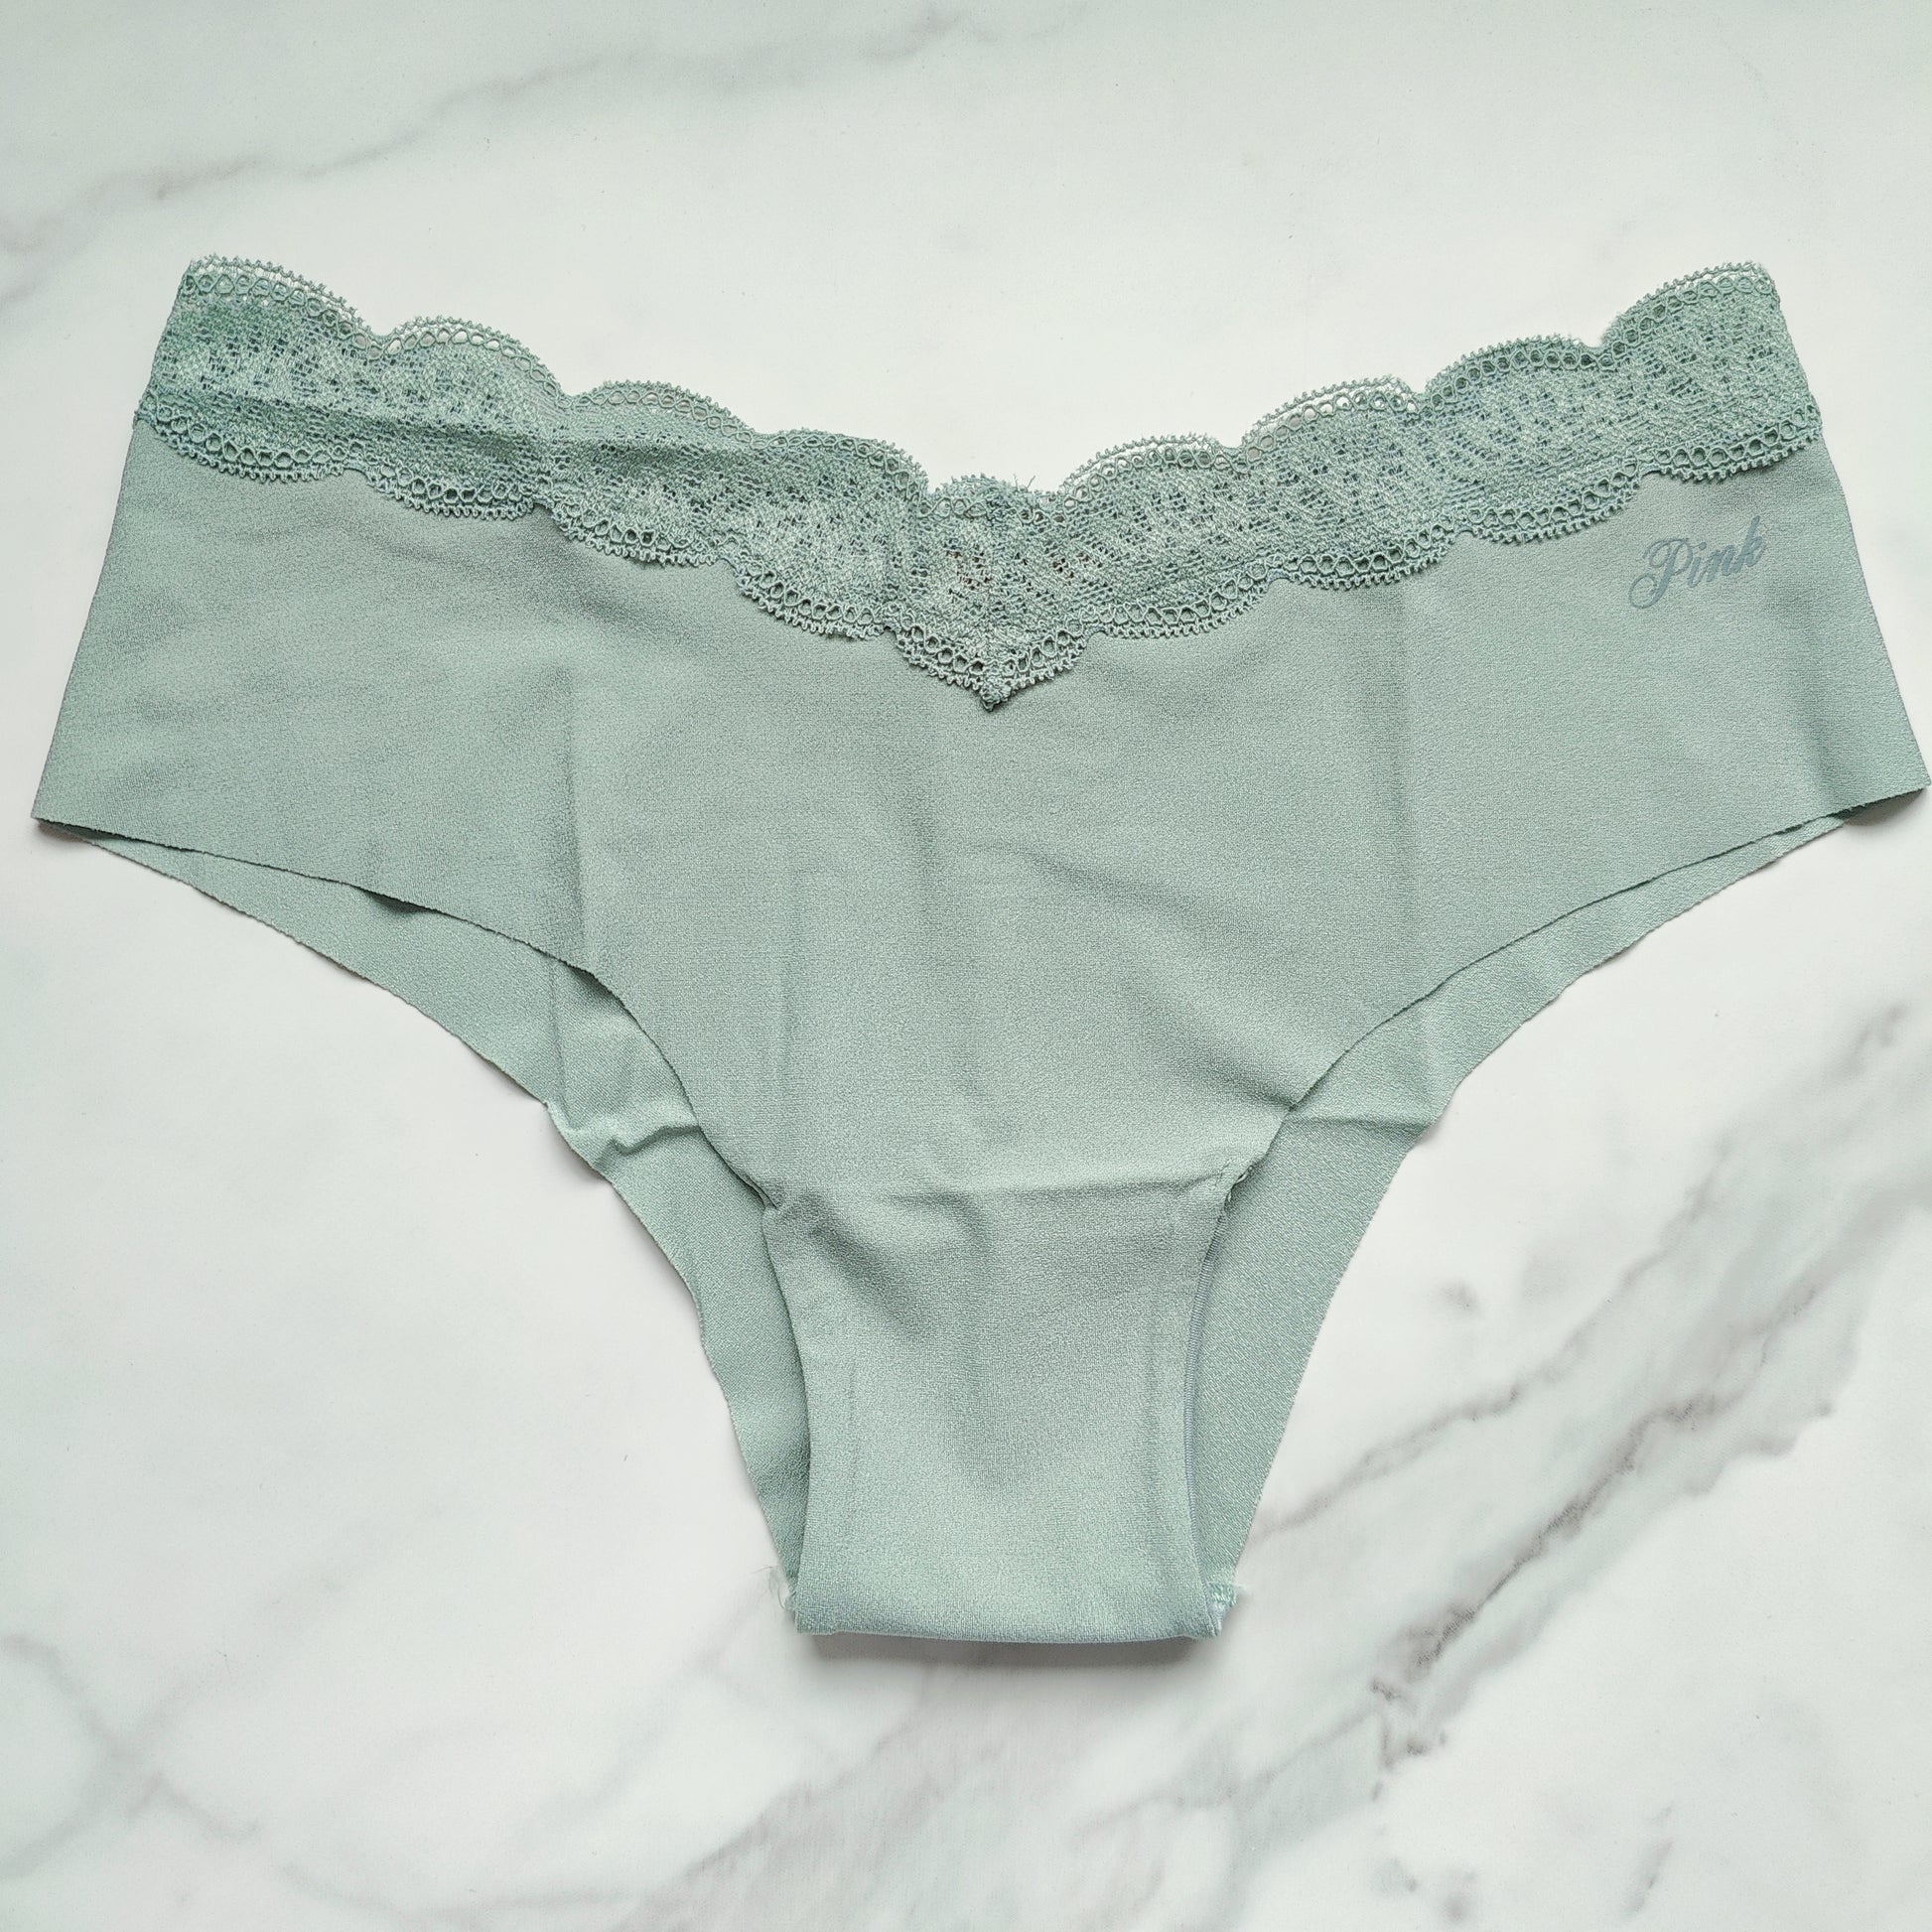 NWT Victoria's Secret olive green cheekster panties, Size M